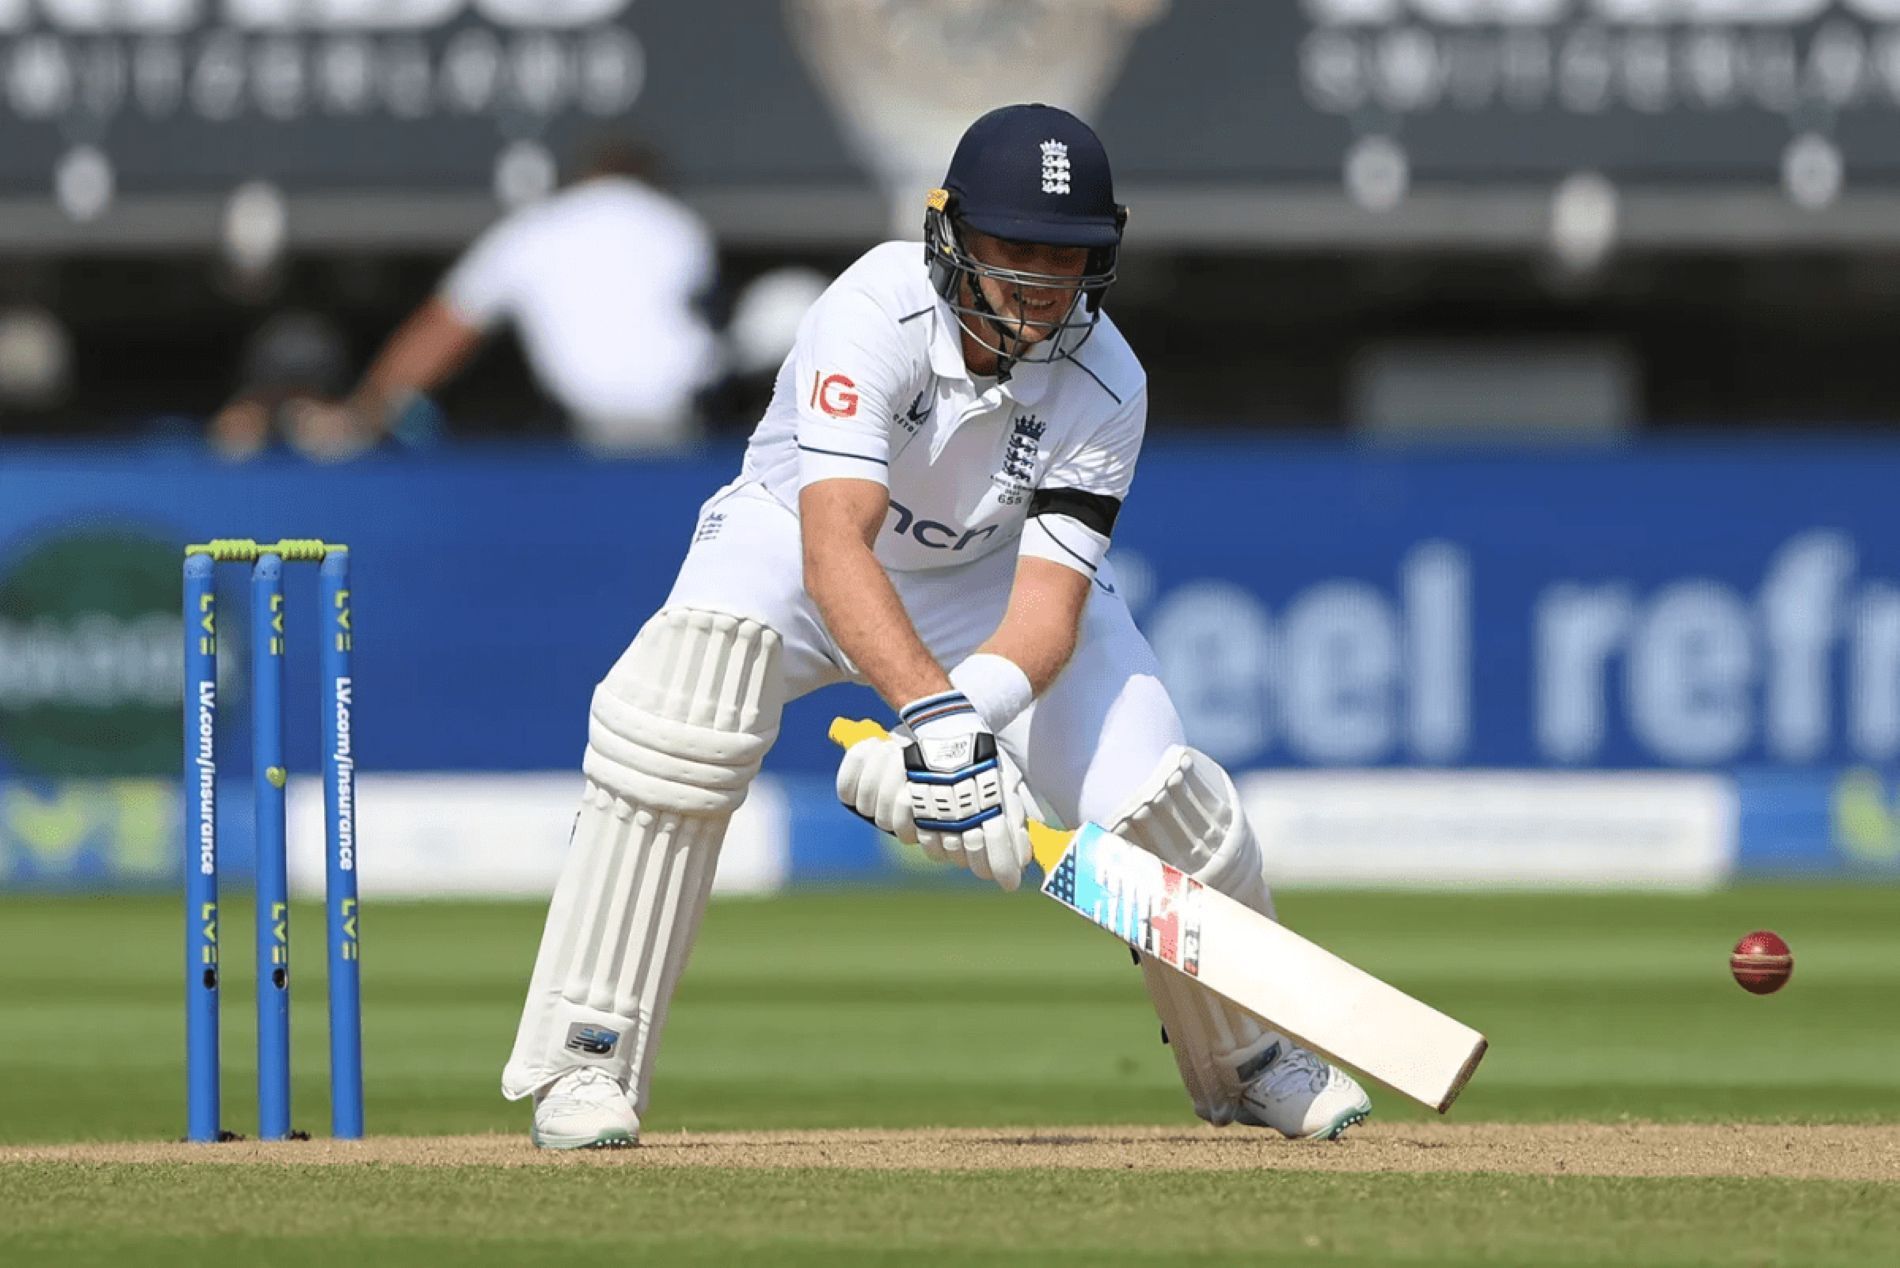 Joe Root had a sensational game in the first Ashes Test